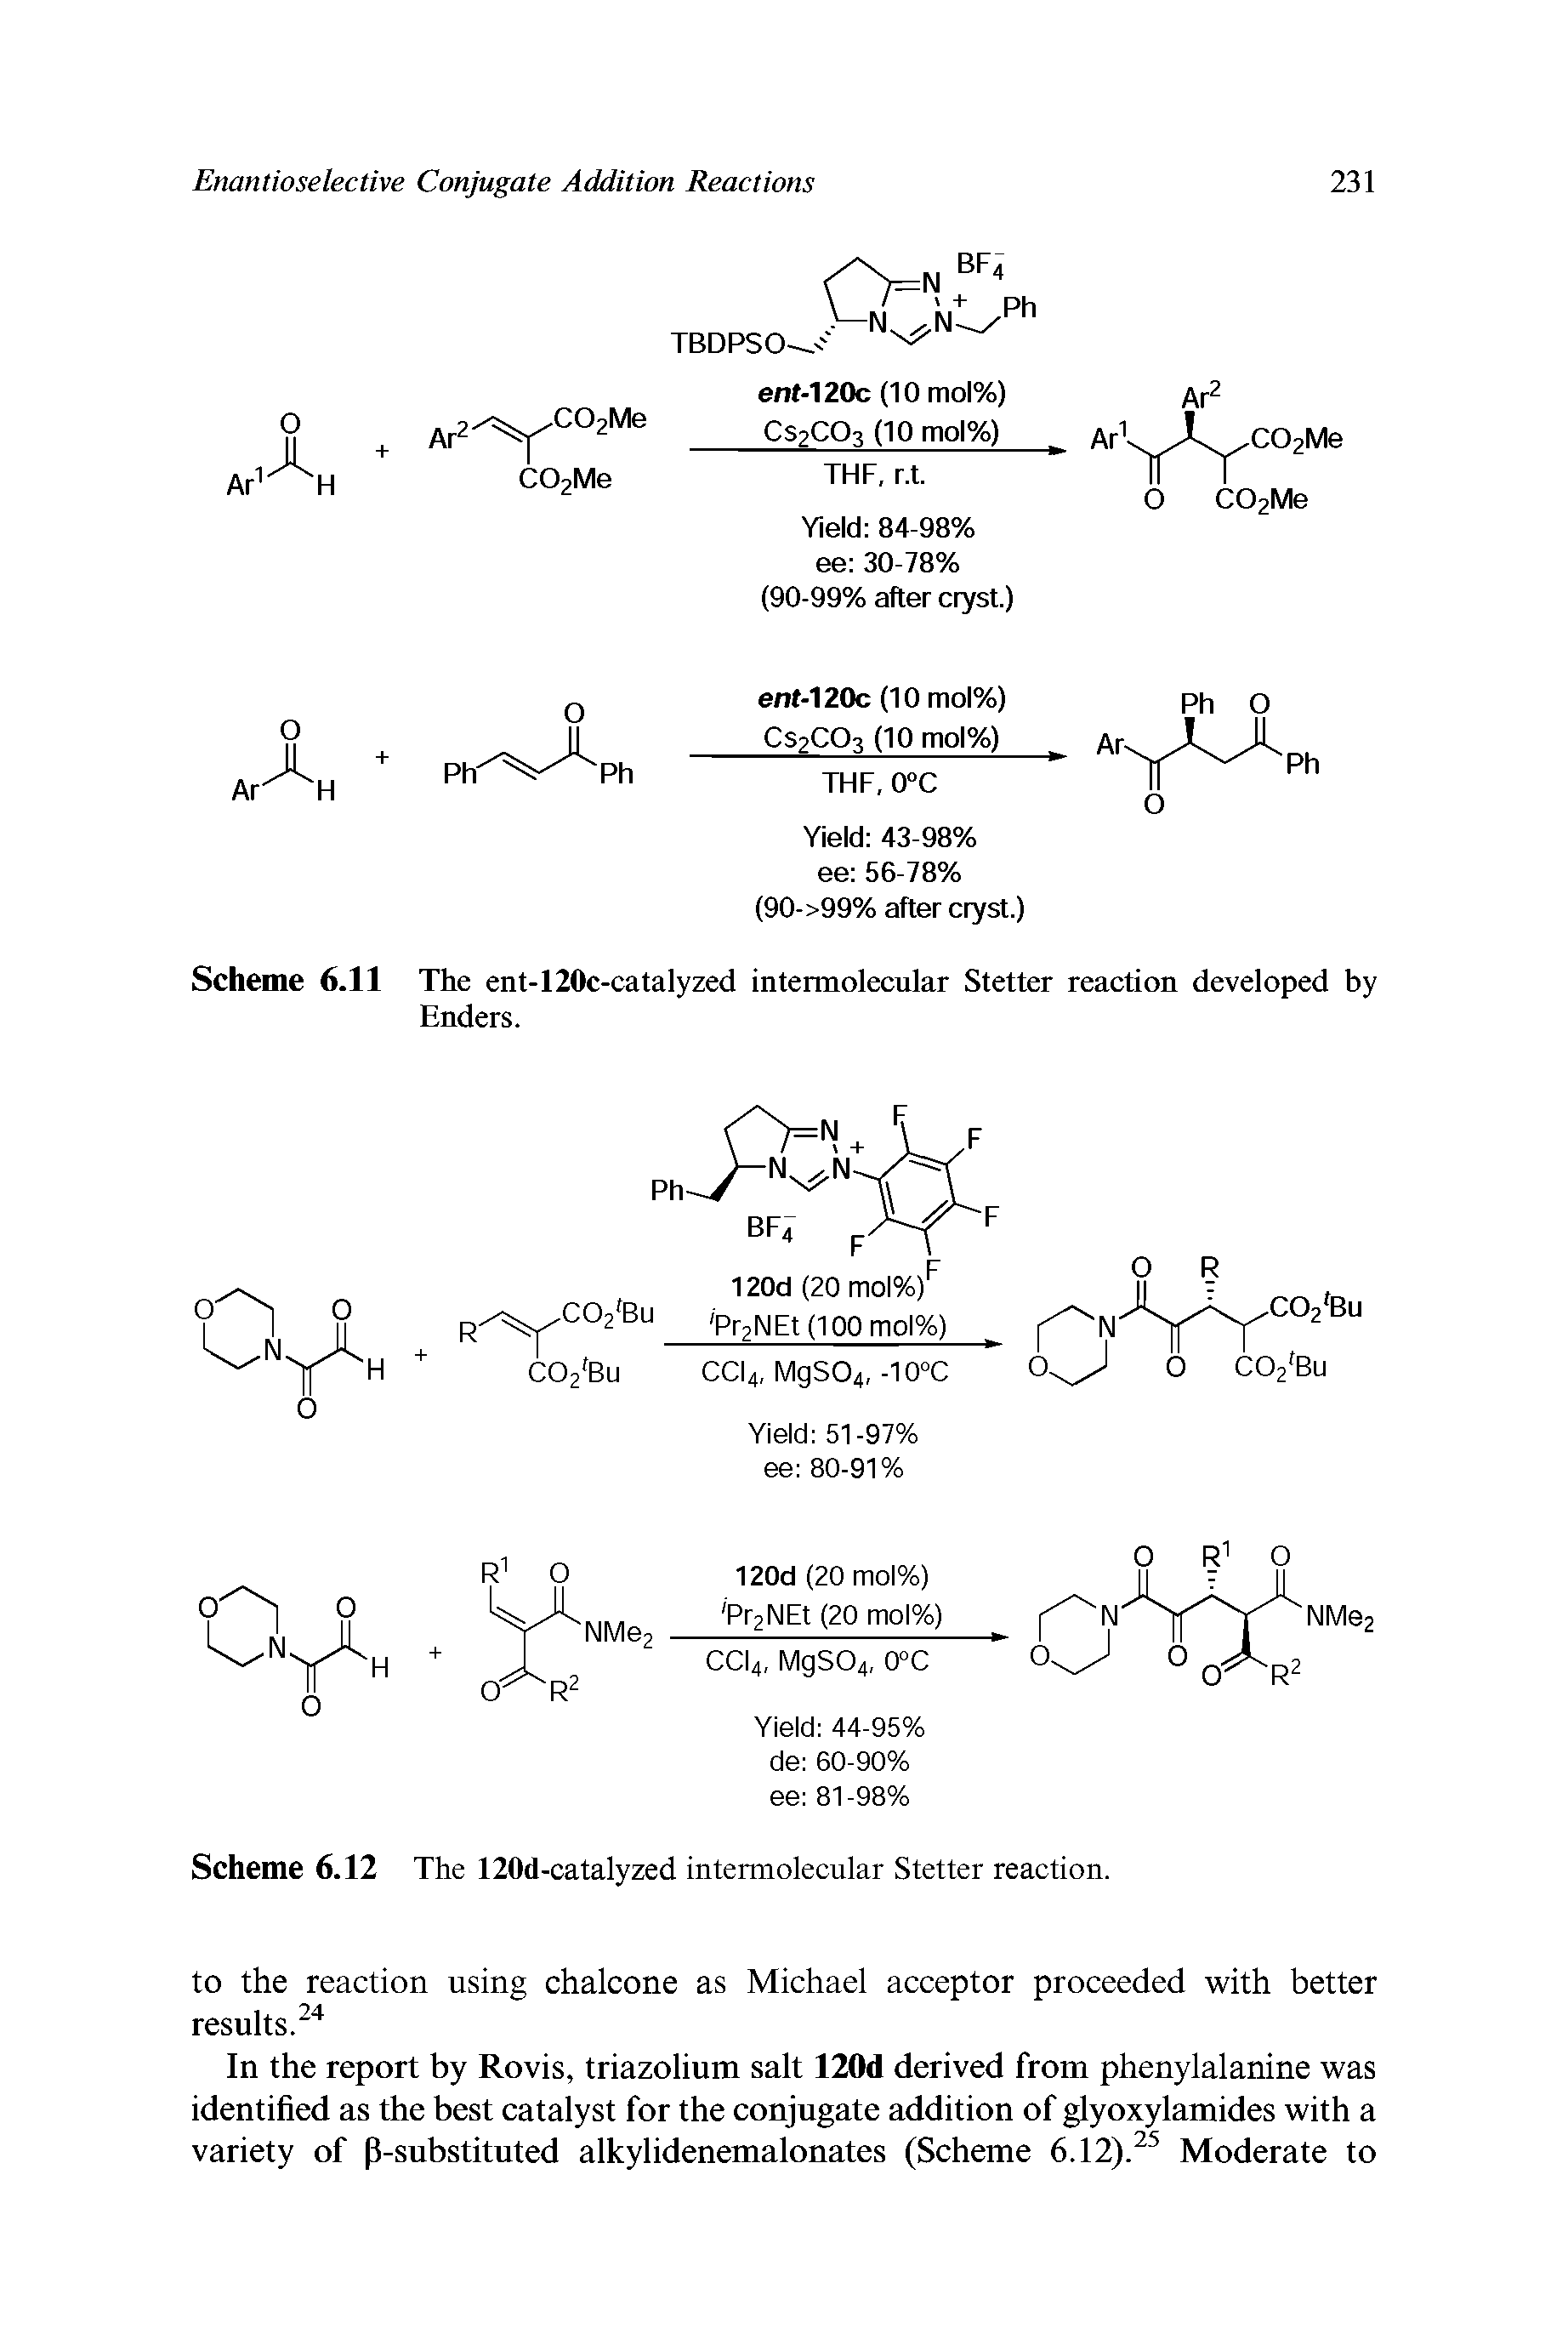 Scheme 6.11 The ent-120c-catalyzed intermolecular Stetter reaction developed by Enders.